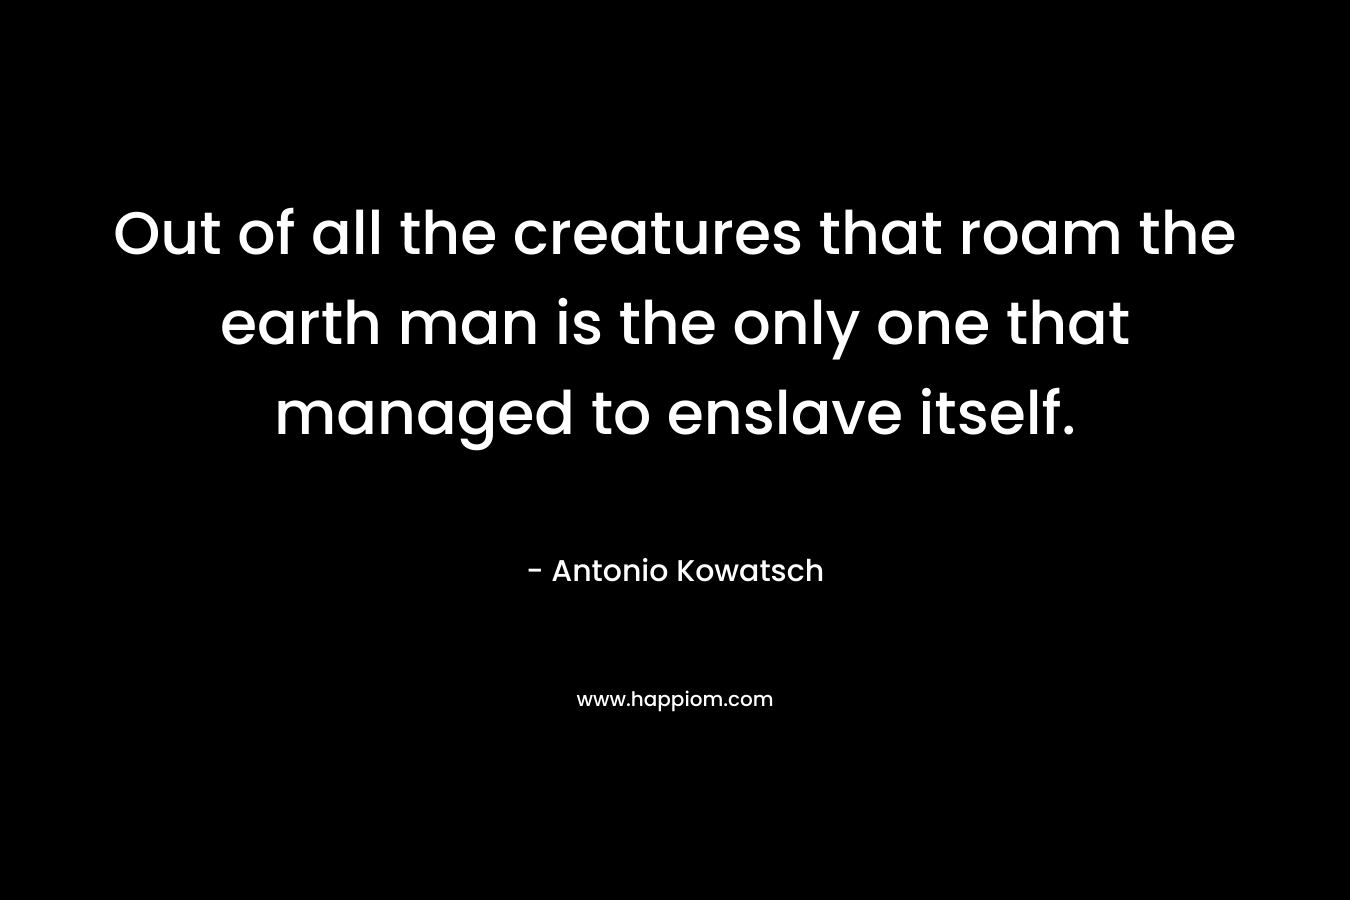 Out of all the creatures that roam the earth man is the only one that managed to enslave itself.